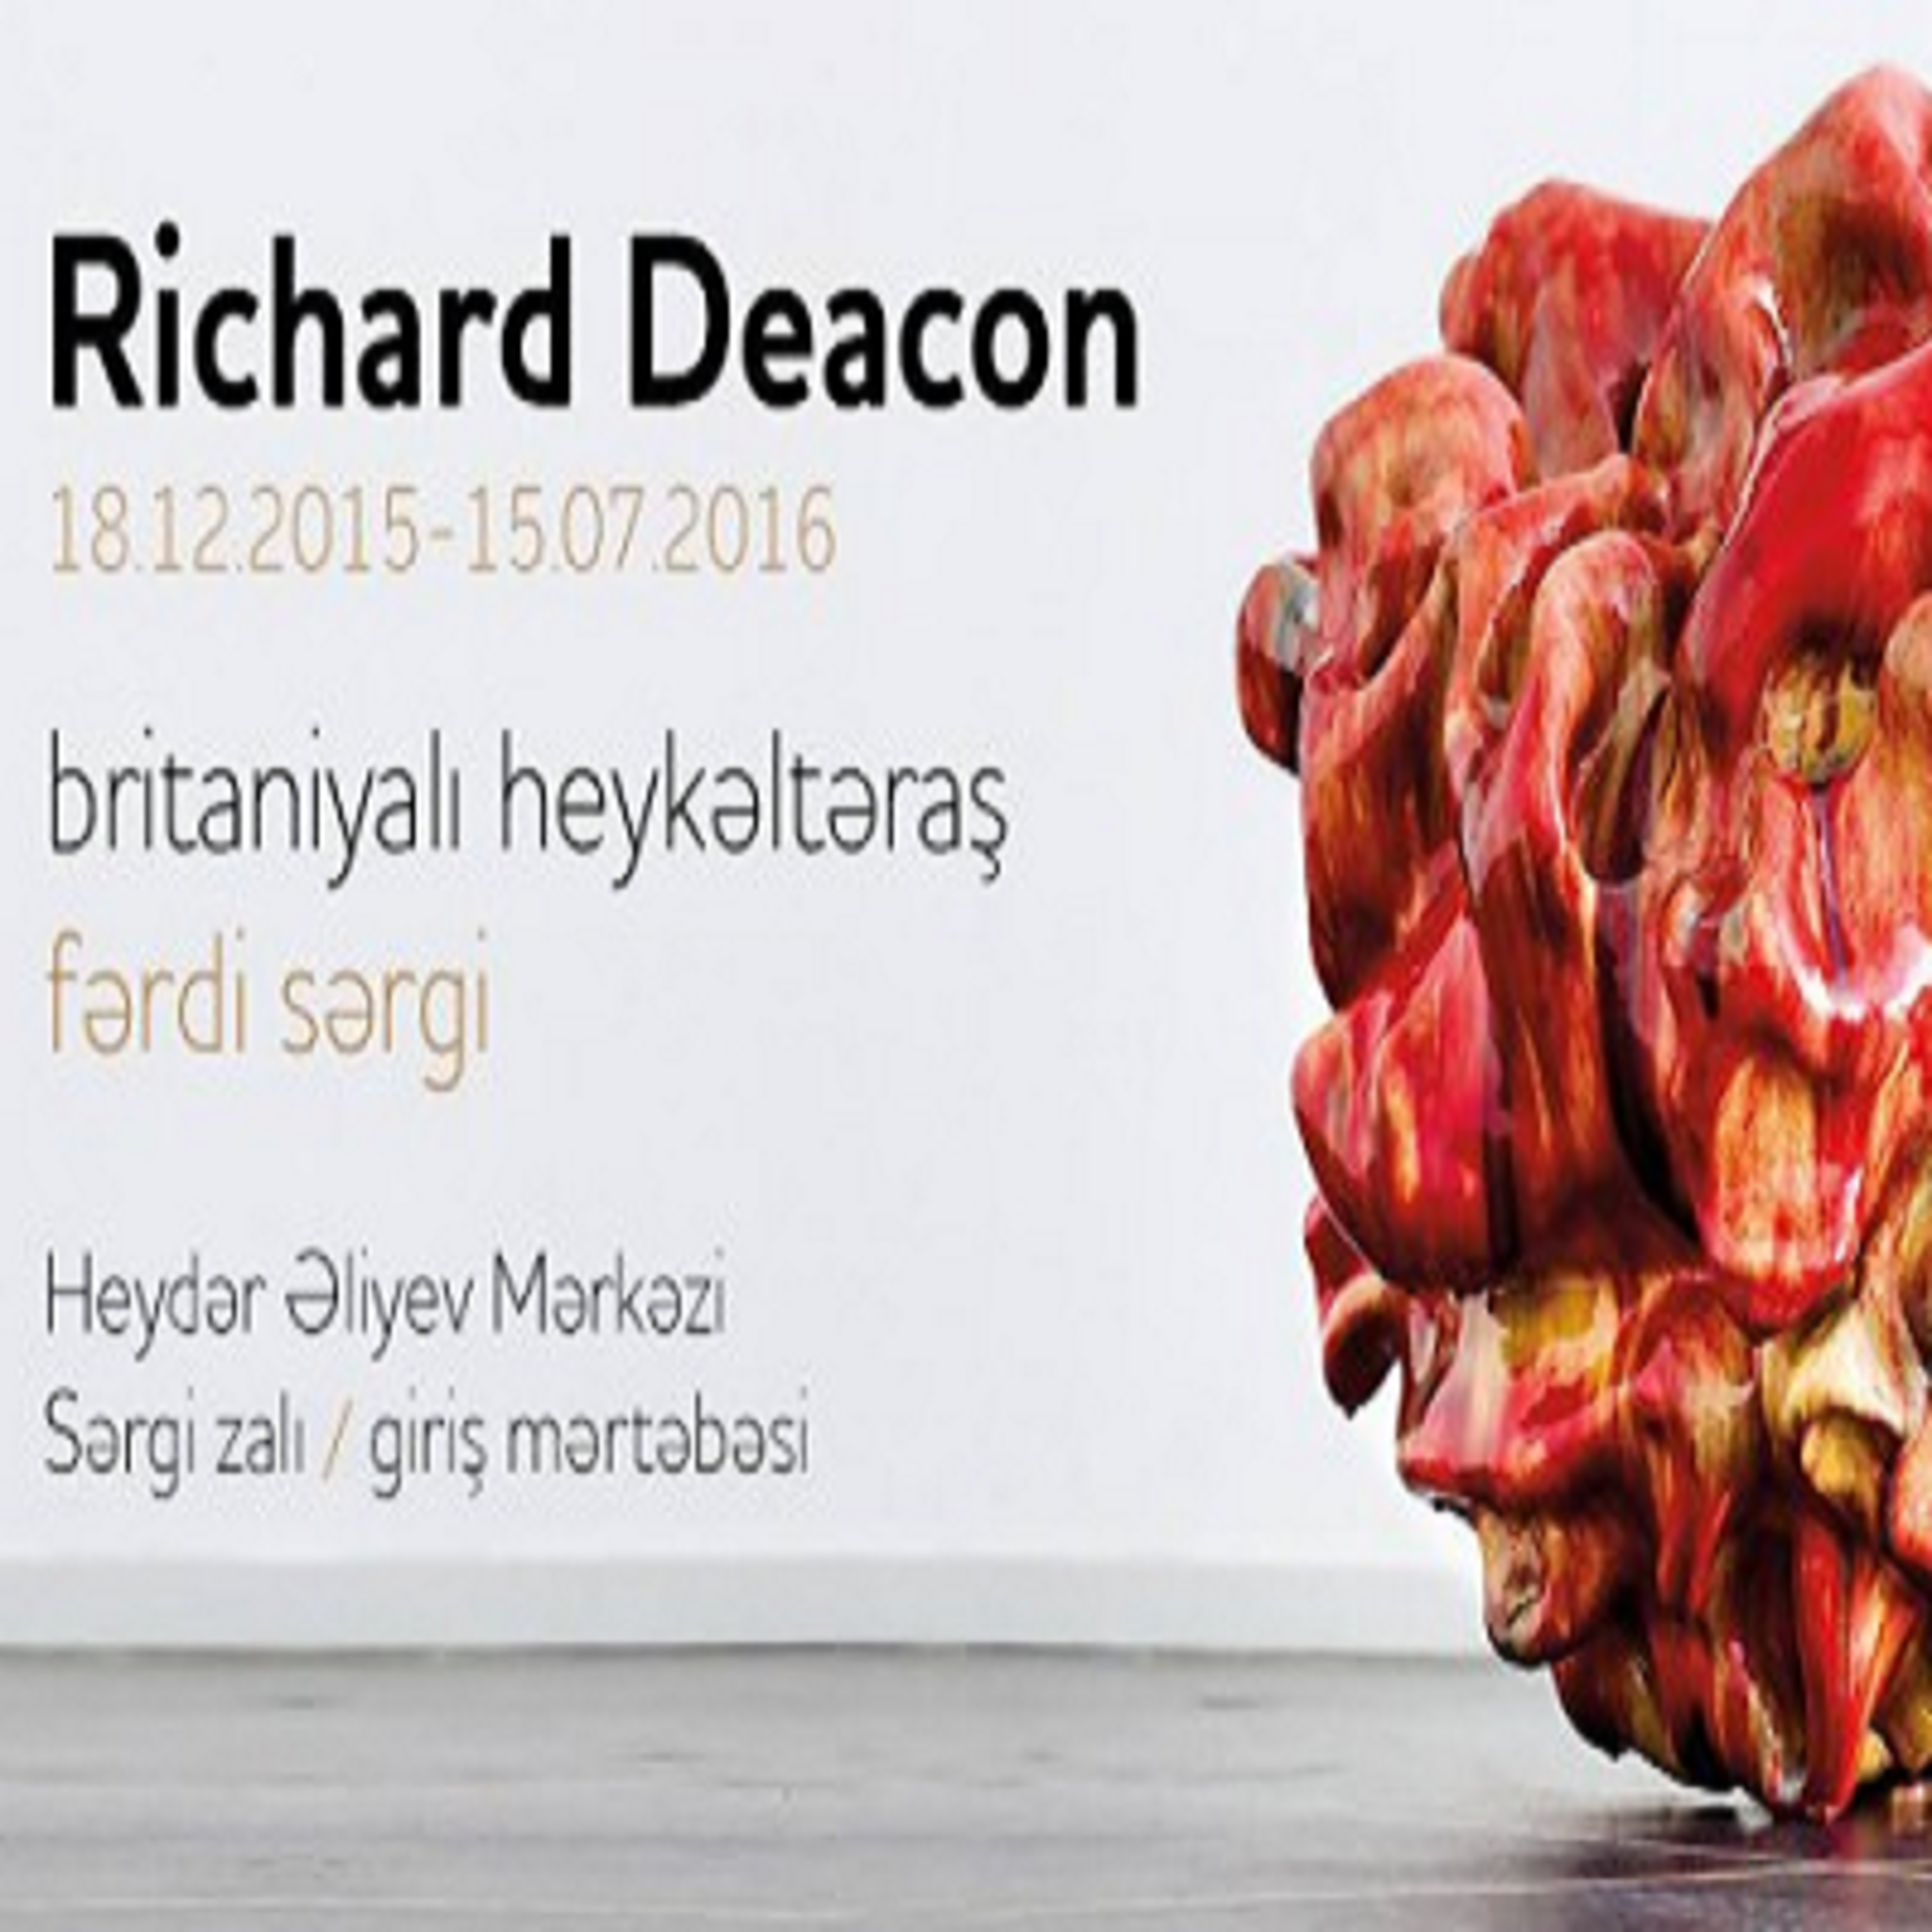 An exhibition of British sculptor Richard deacon of From other side